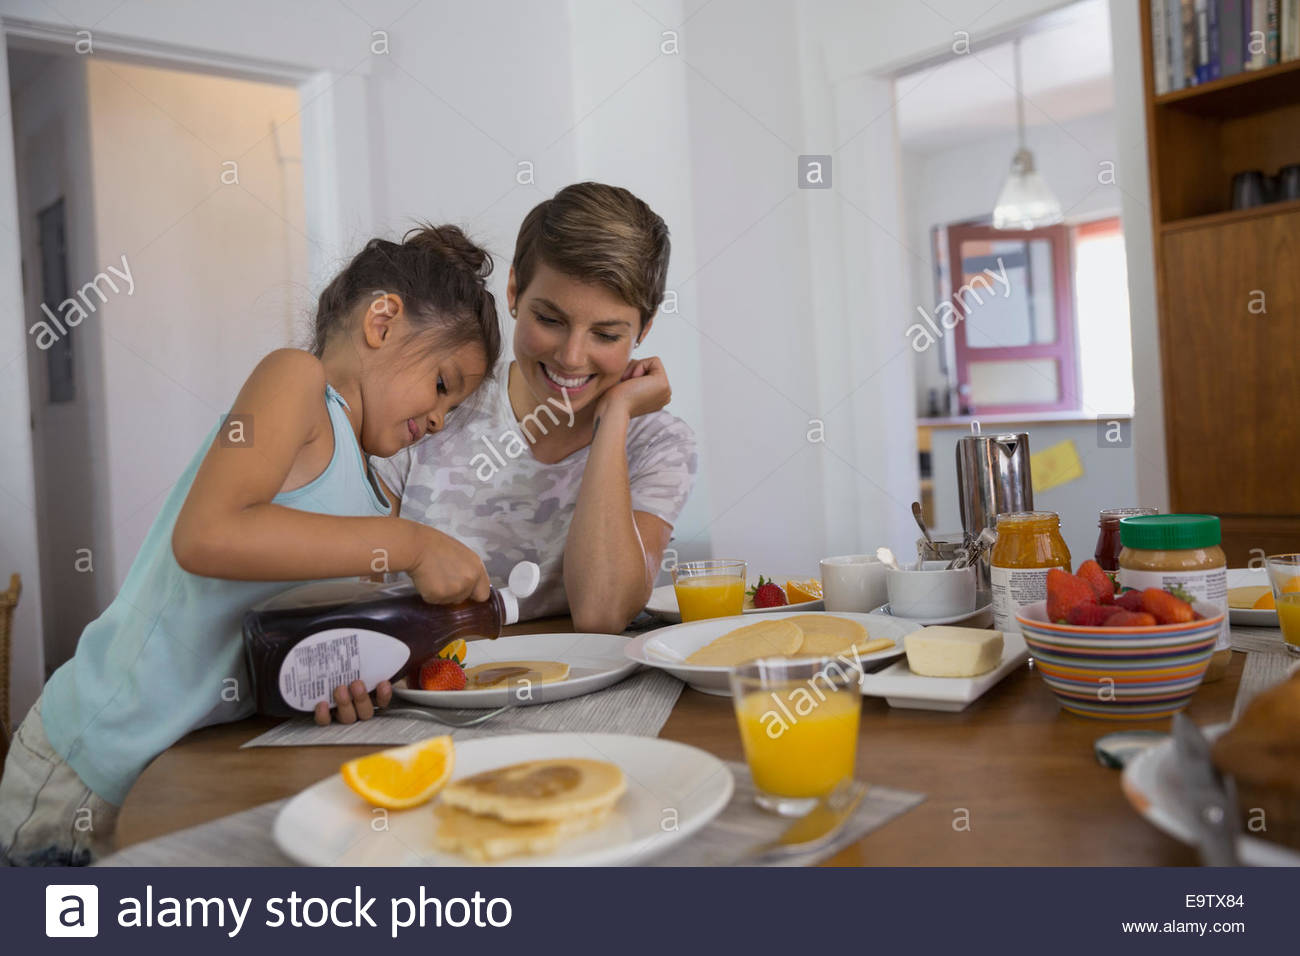 Mother watching daughter pour syrup on pancakes Stock Photo